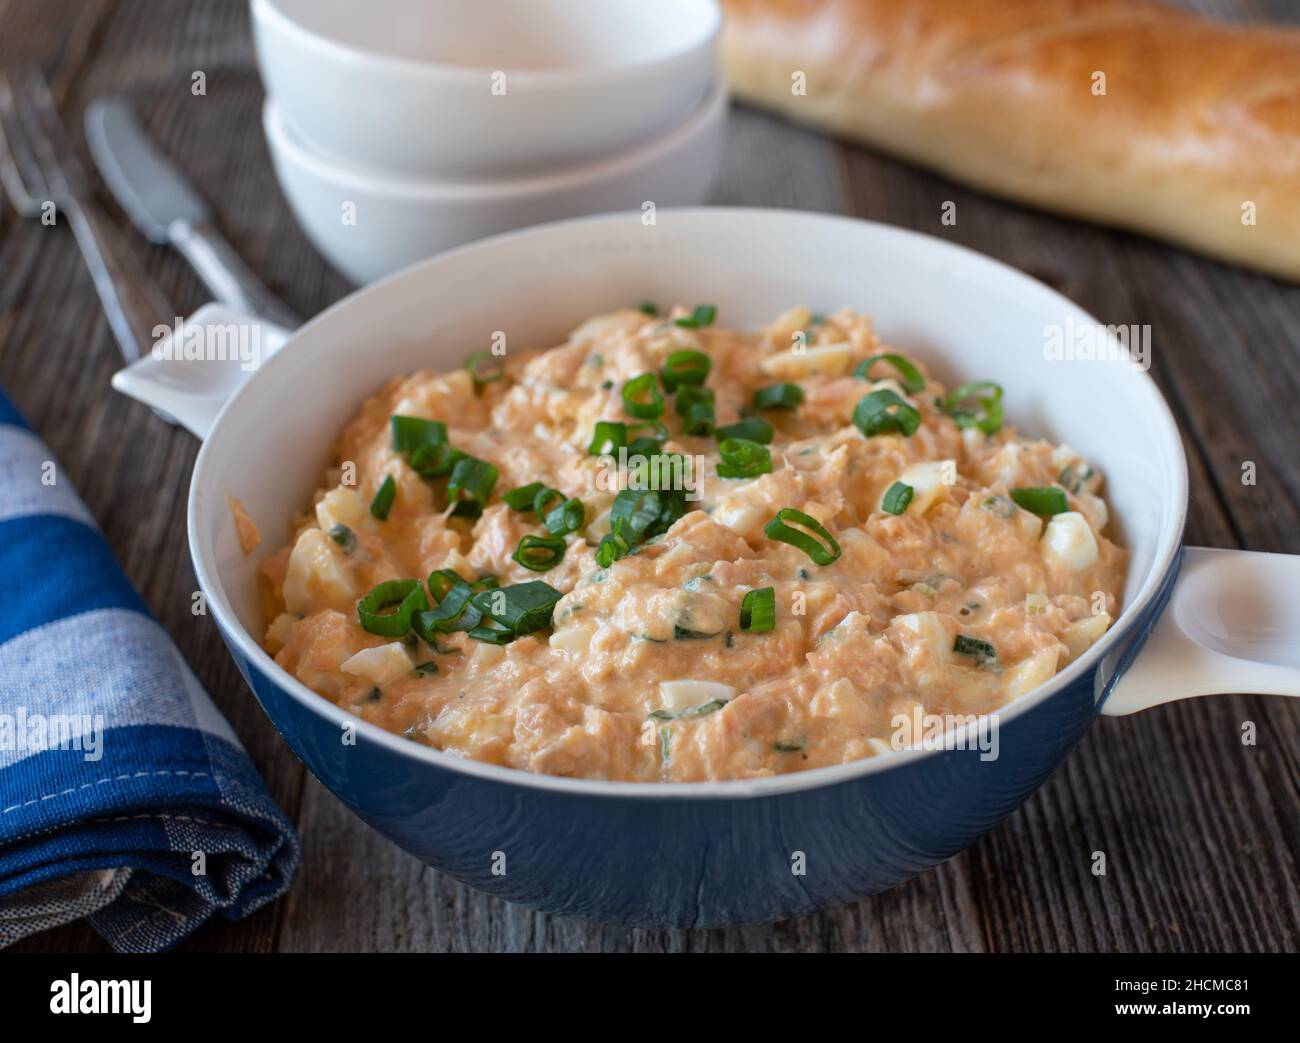 Seafood salad in a bowl made with salmon fillet, boiled eggs, onions, mayonnaise and chives. Served with fresh baguette on wooden table Stock Photo